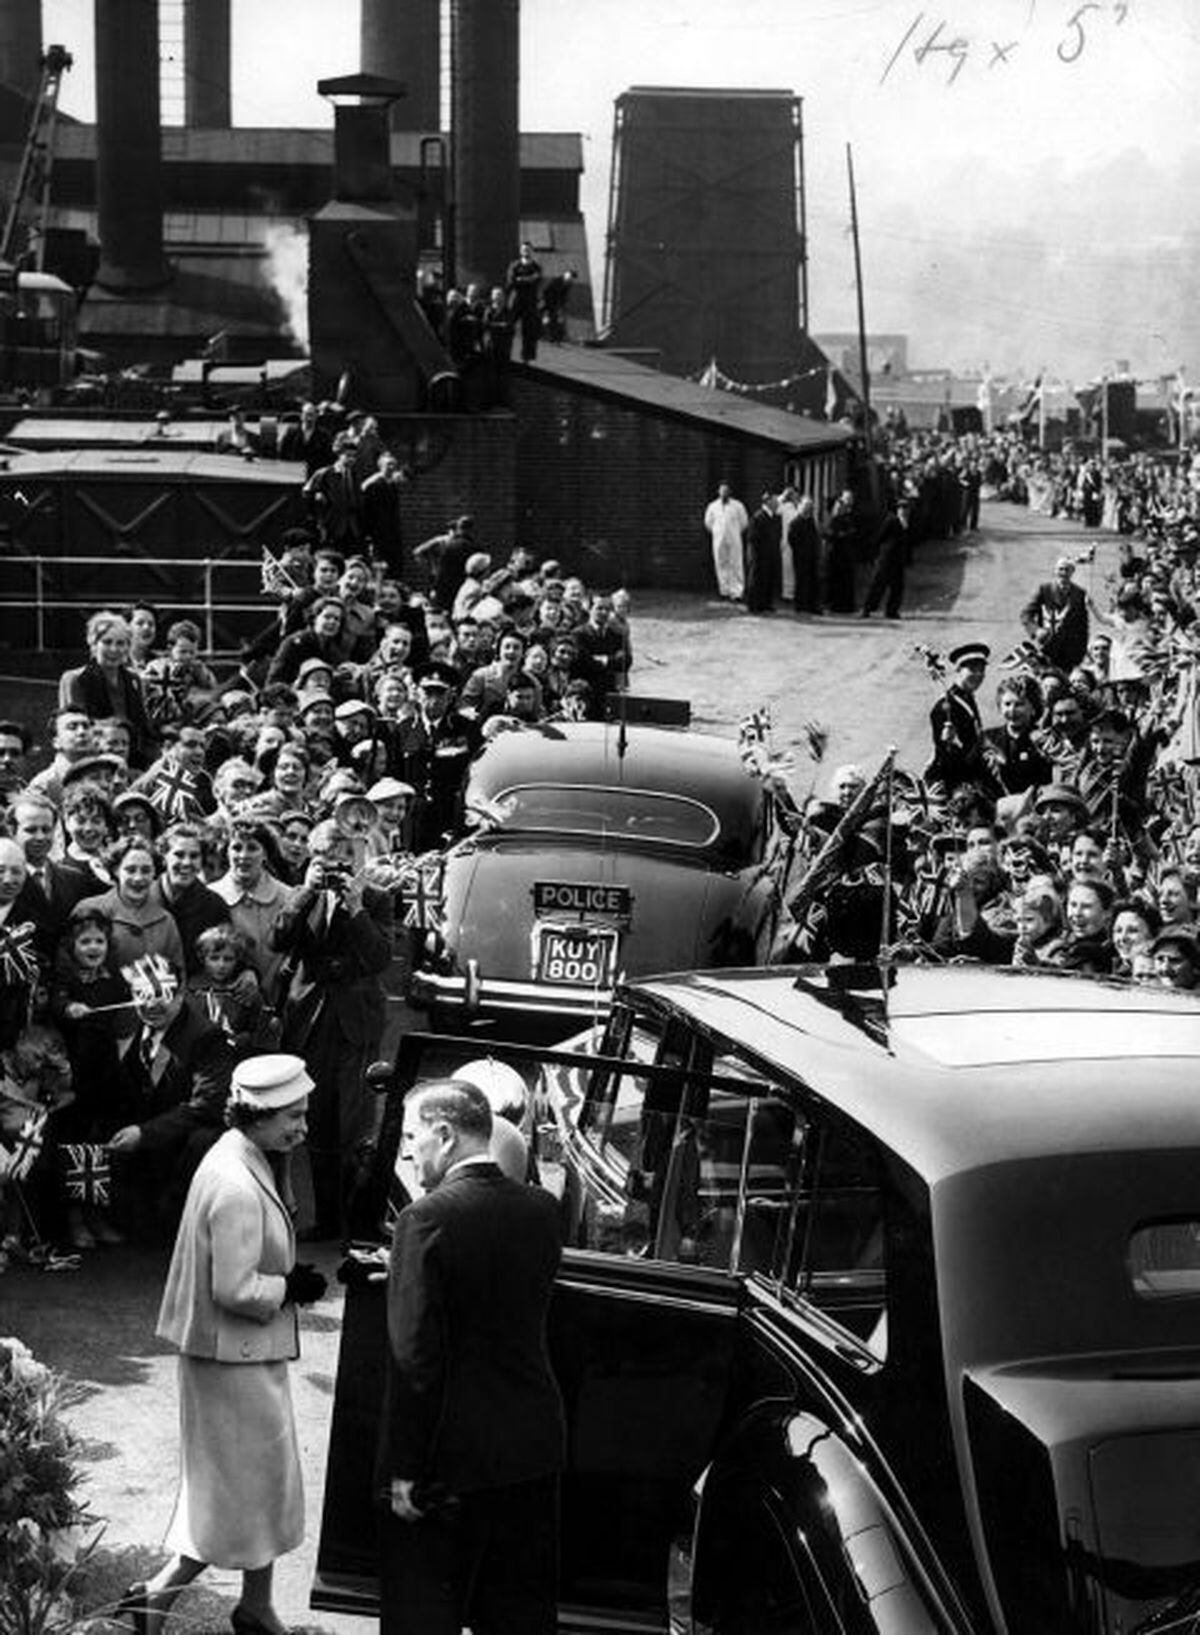 The Queen arrives at Walter Somers engineering works in Halesowen during a visit in April, 1957